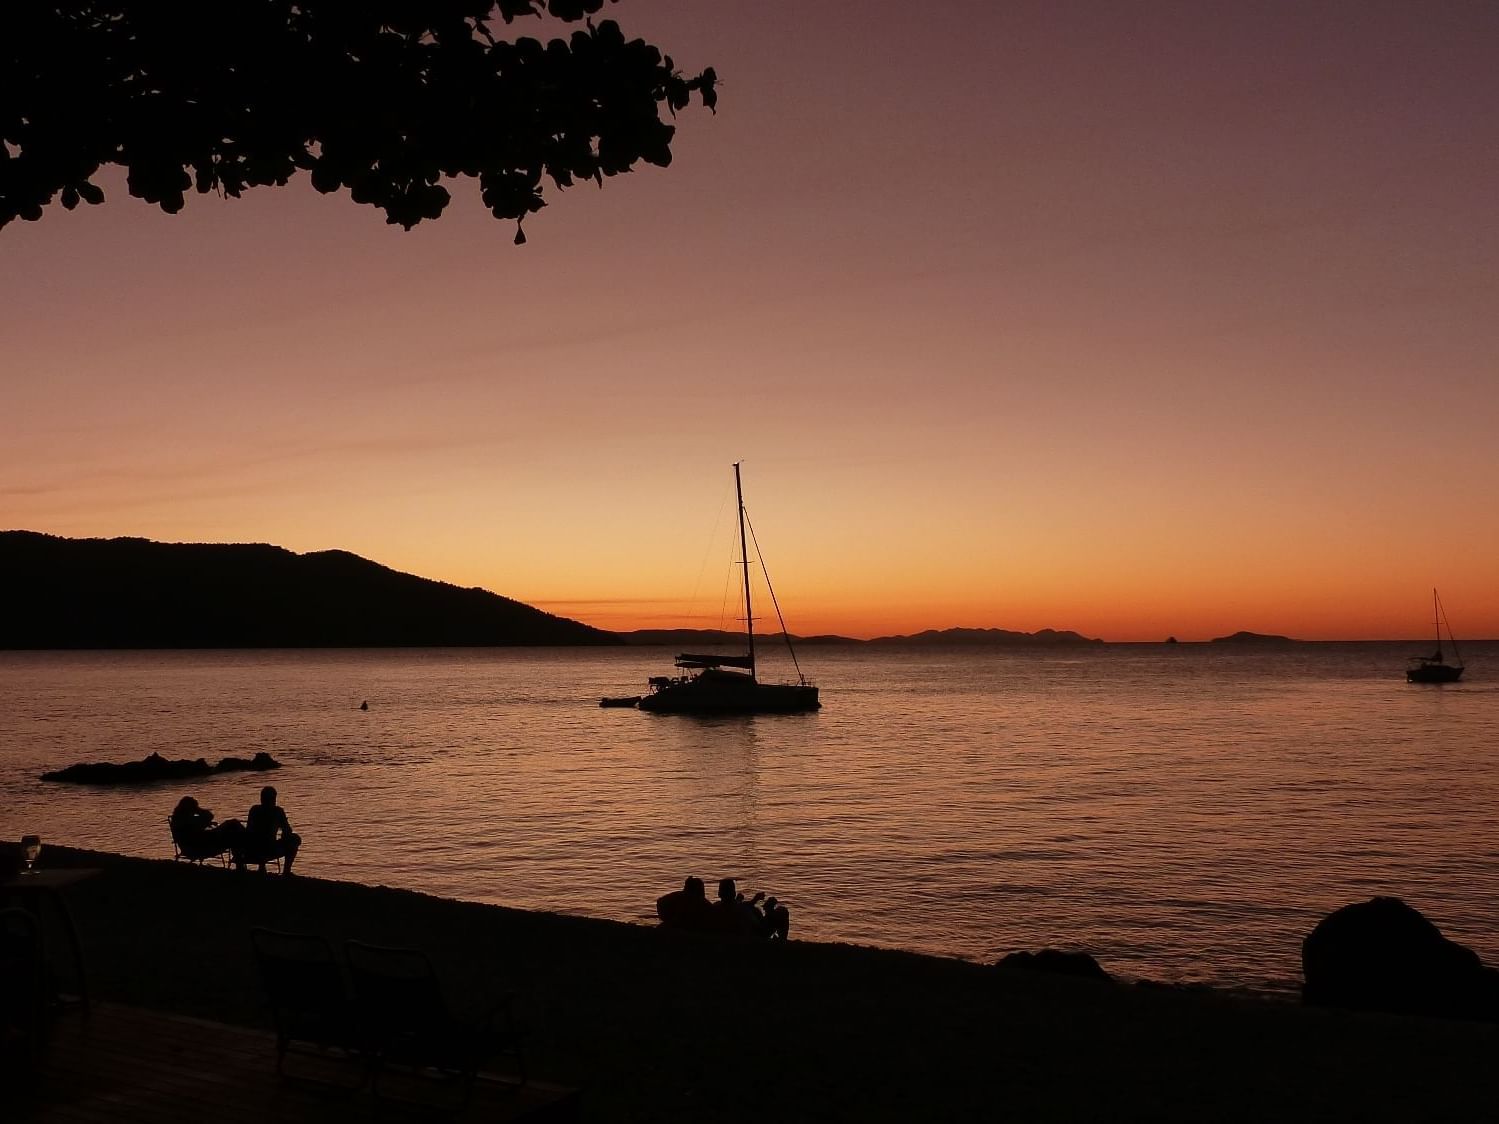 Sunset view from Lovers cove bar at Daydream Island Resort